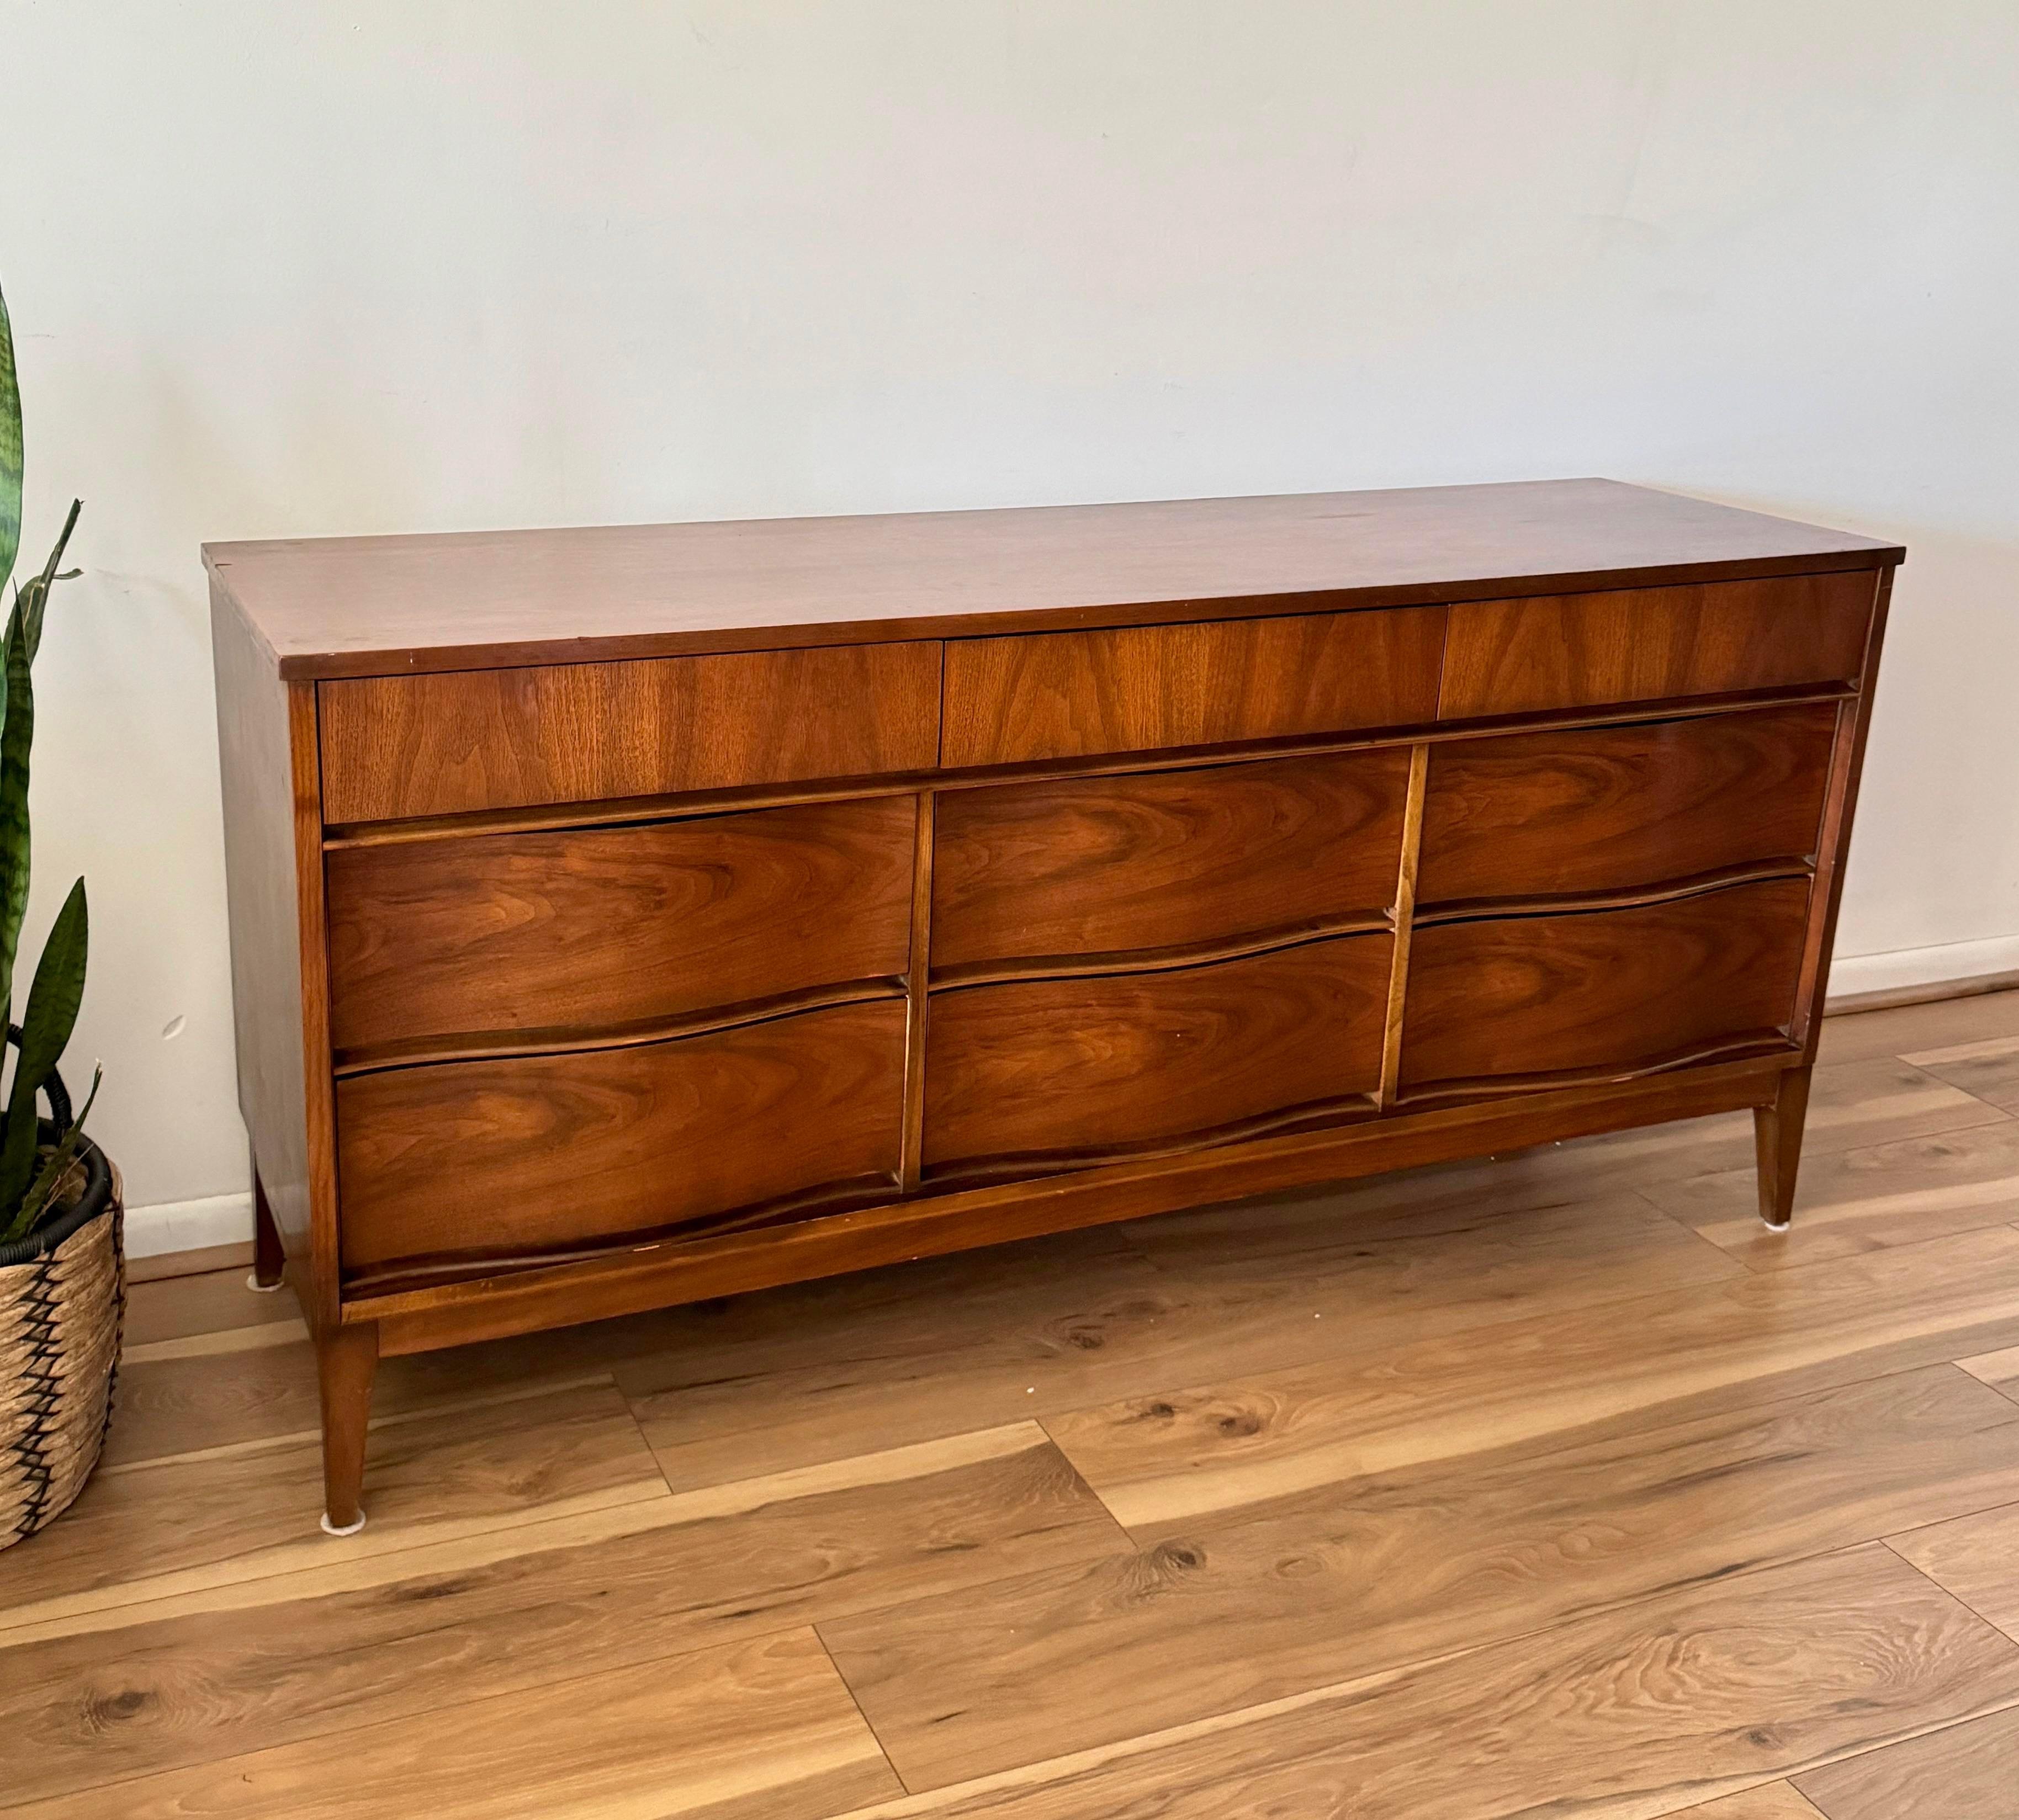 1970s Vintage Mid Century Modern 9-Drawer Lowboy Dresser showcases a refined aesthetic, blending timeless design with functional craftsmanship. Its sleek silhouette is complemented by a thoughtfully curated curvy drawer arrangement, offering both